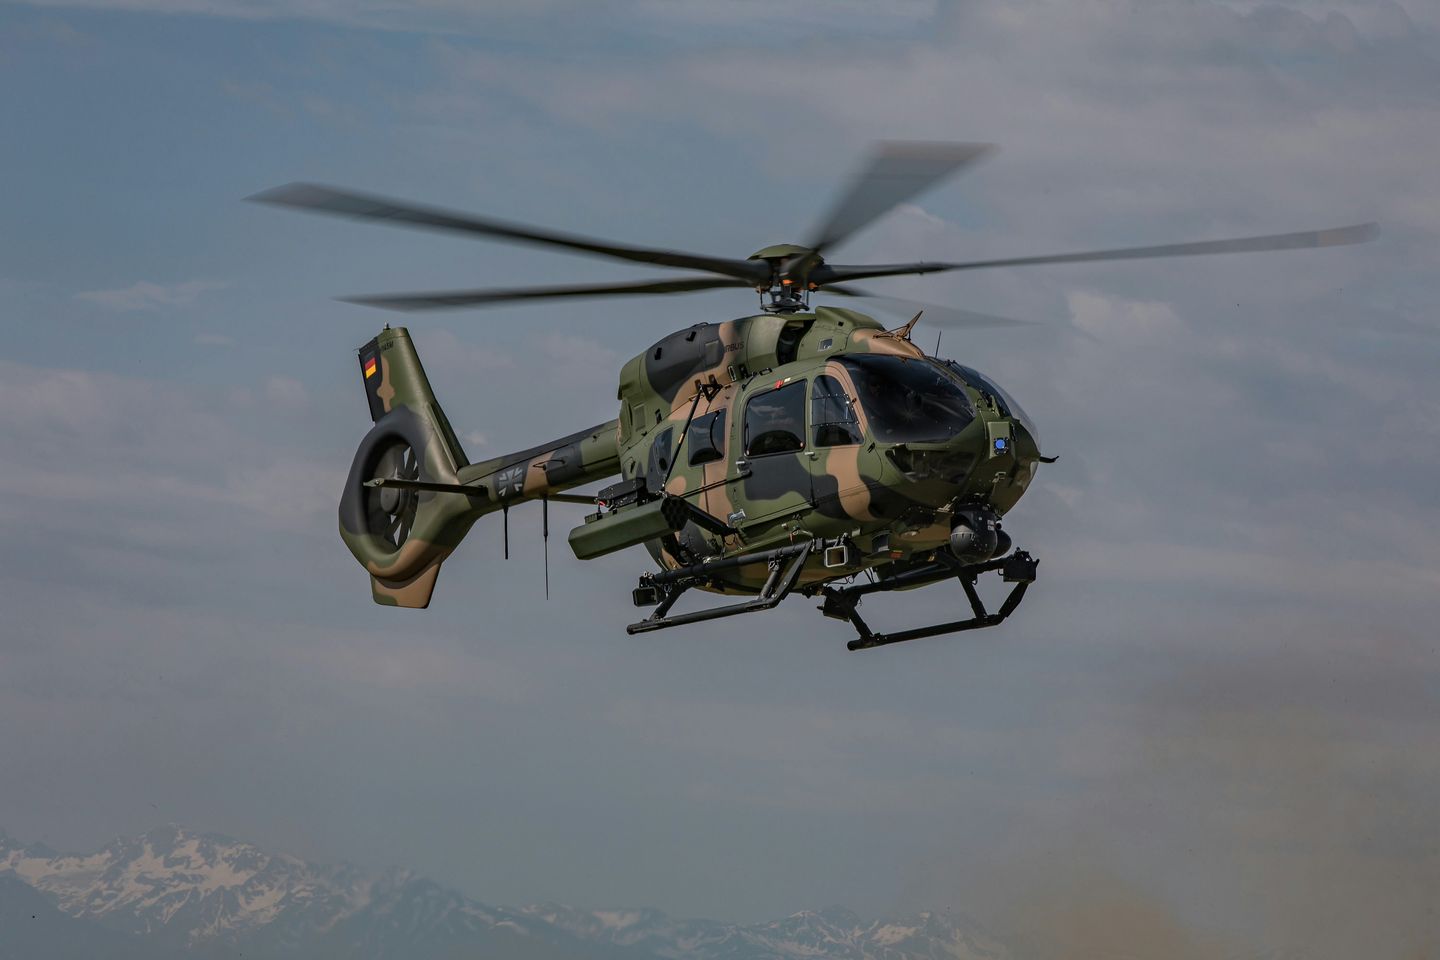 German Bundeswehr  Has  Placed  The  Largest  Ever  Order  Of  82  multi-role H145M  helicopters  With Airbus.